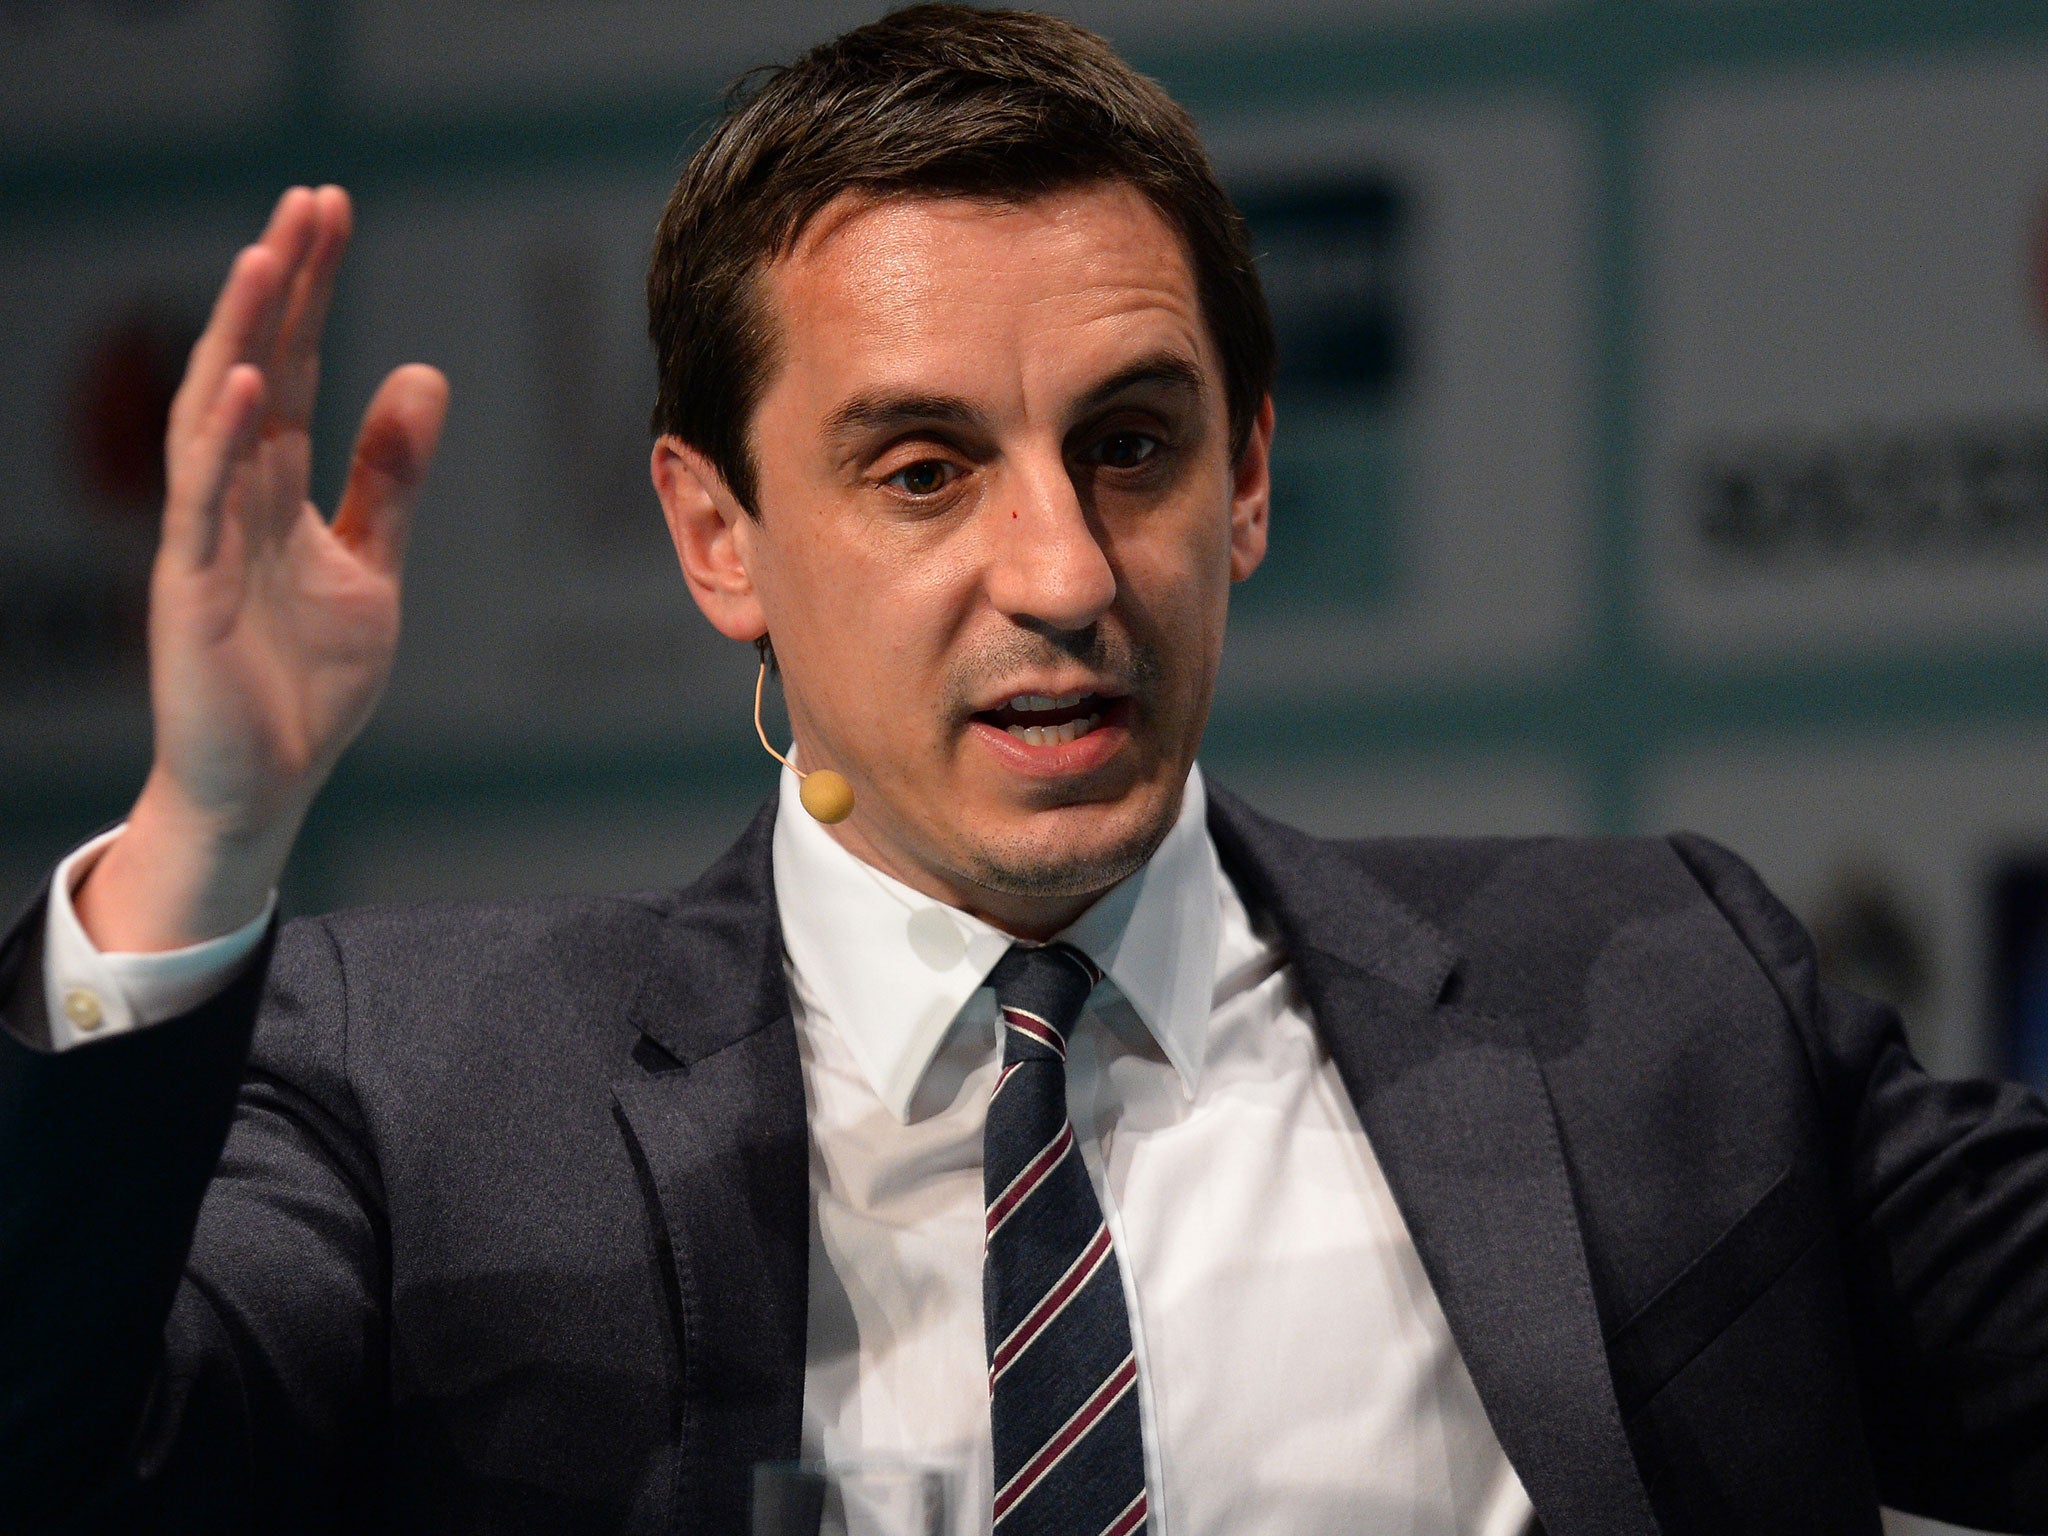 Gary Neville enjoyed great success as part of a golden generation of young players at Manchester United, in contrast to the recent fortunes of England’s youth teams